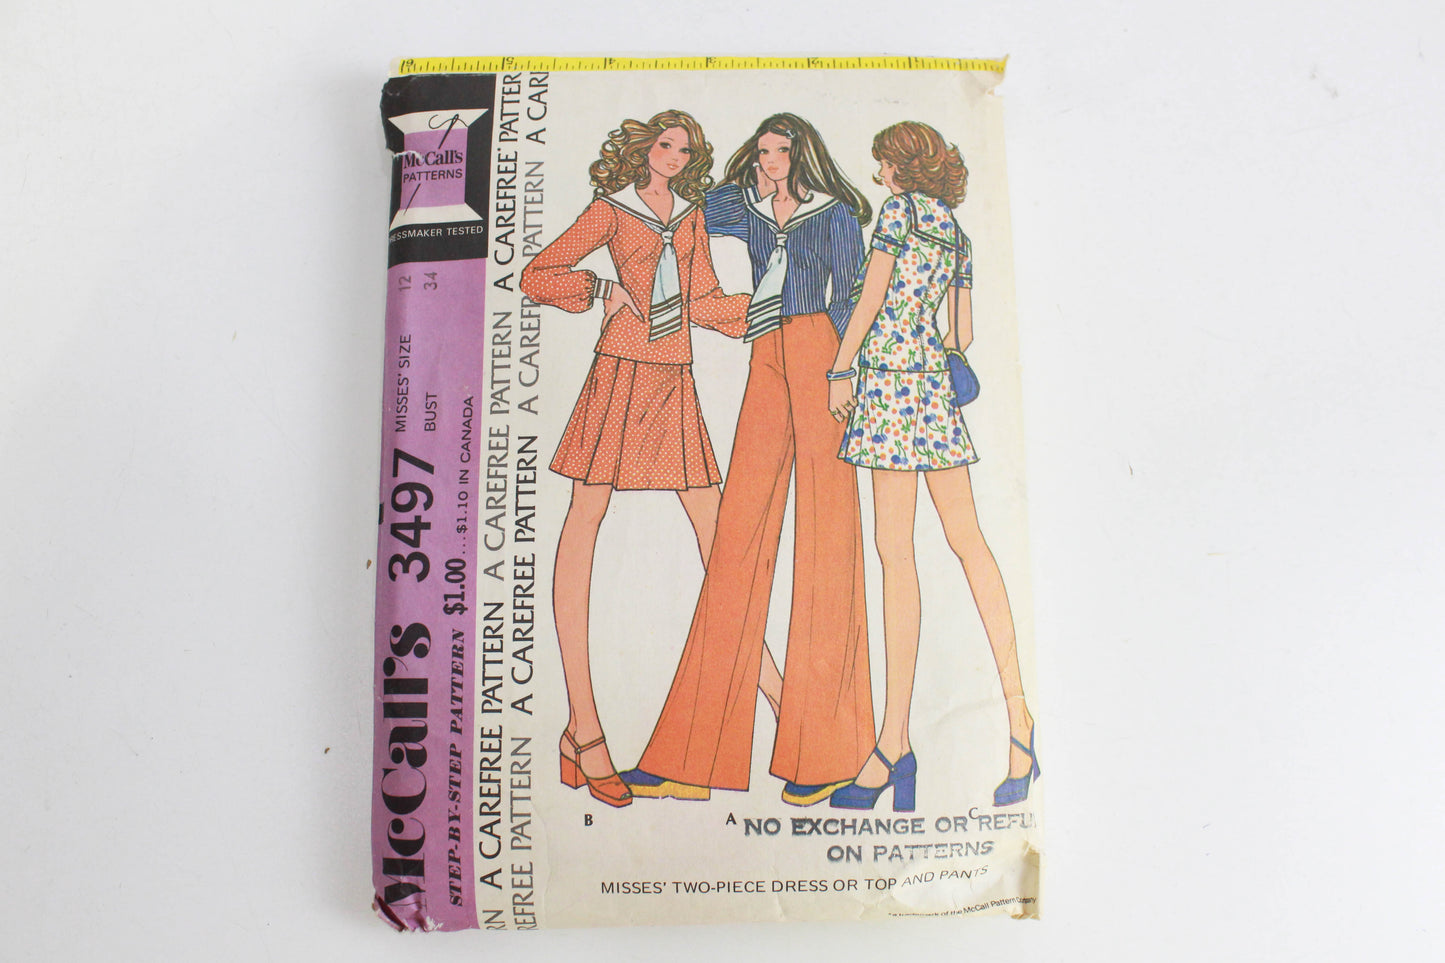 1970s Pants, Skirt Suit or Top Sewing Pattern McCall's 3497, Bust 34